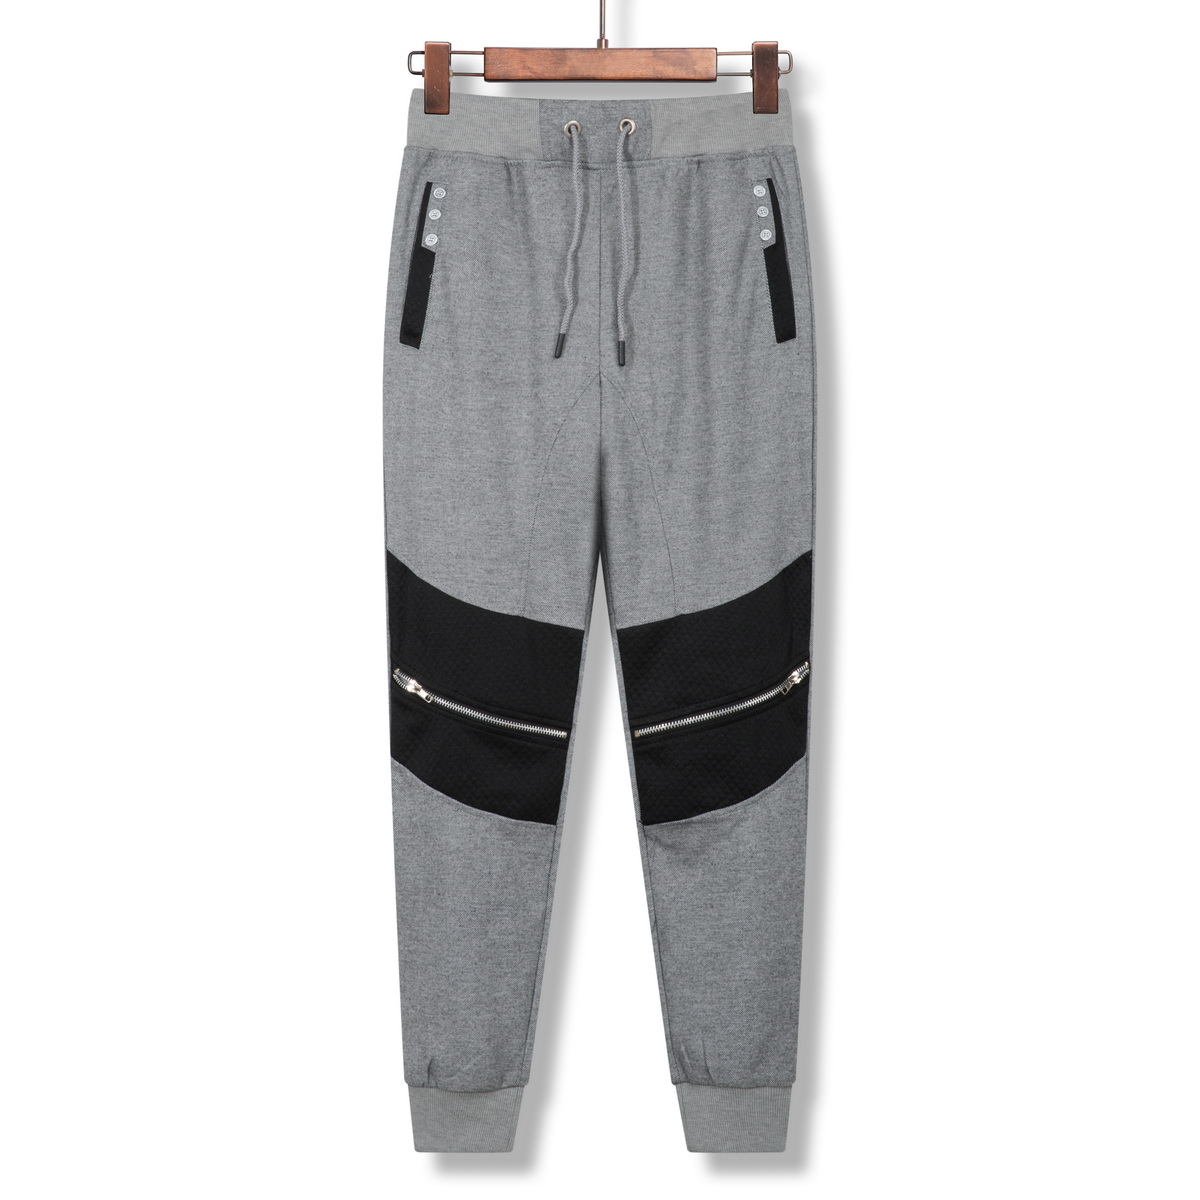 men's joggers with two zipper